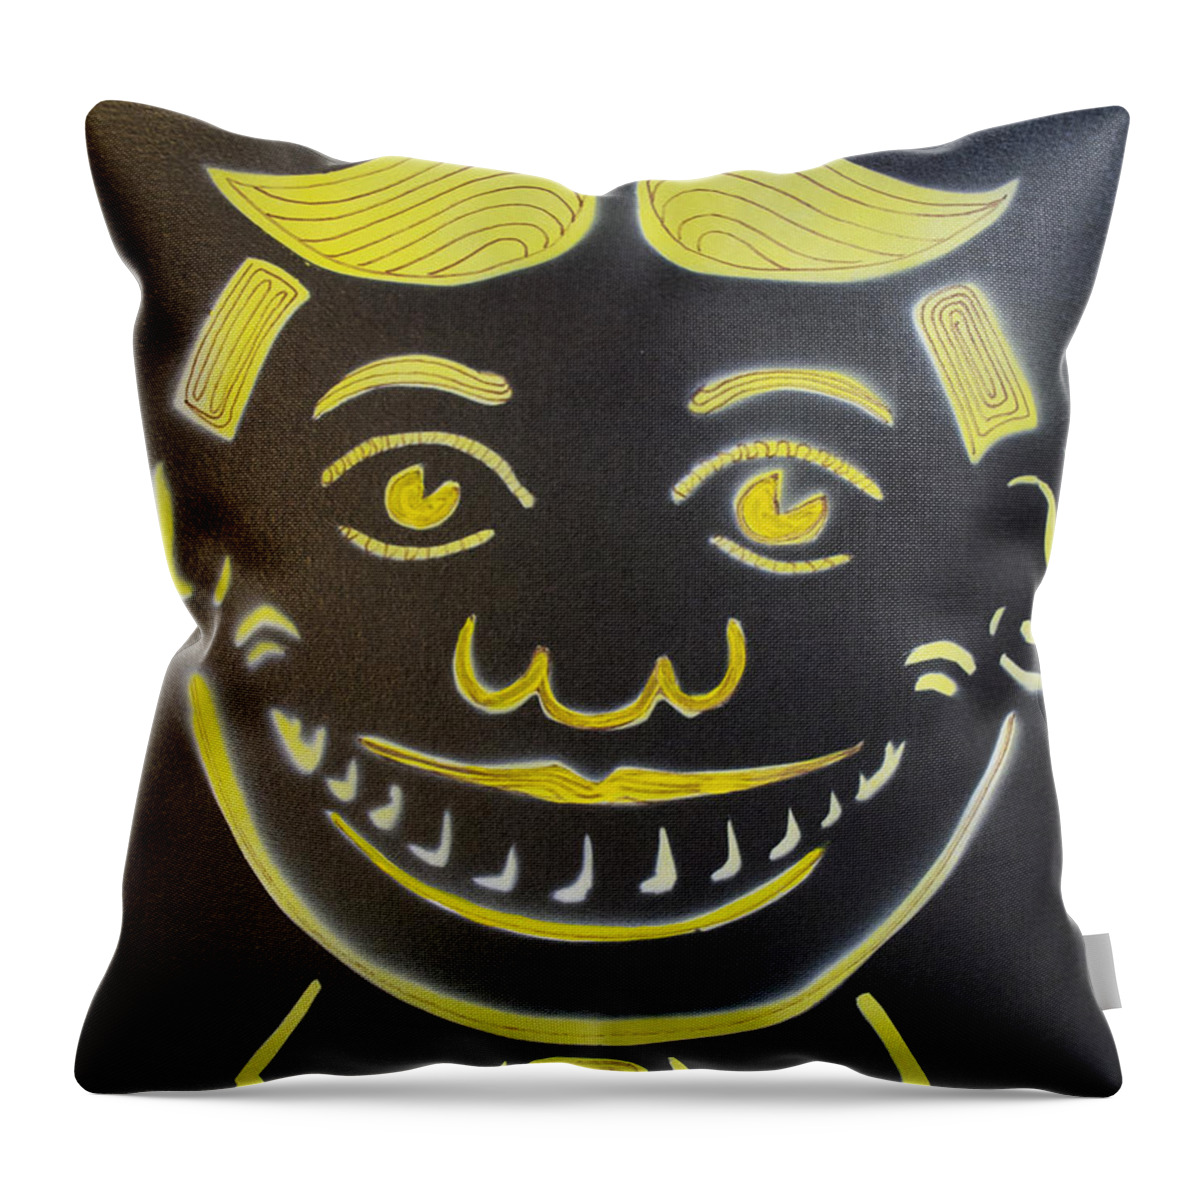 Tillie Of Asbury Park Throw Pillow featuring the painting Yellow on Black Tillie by Patricia Arroyo